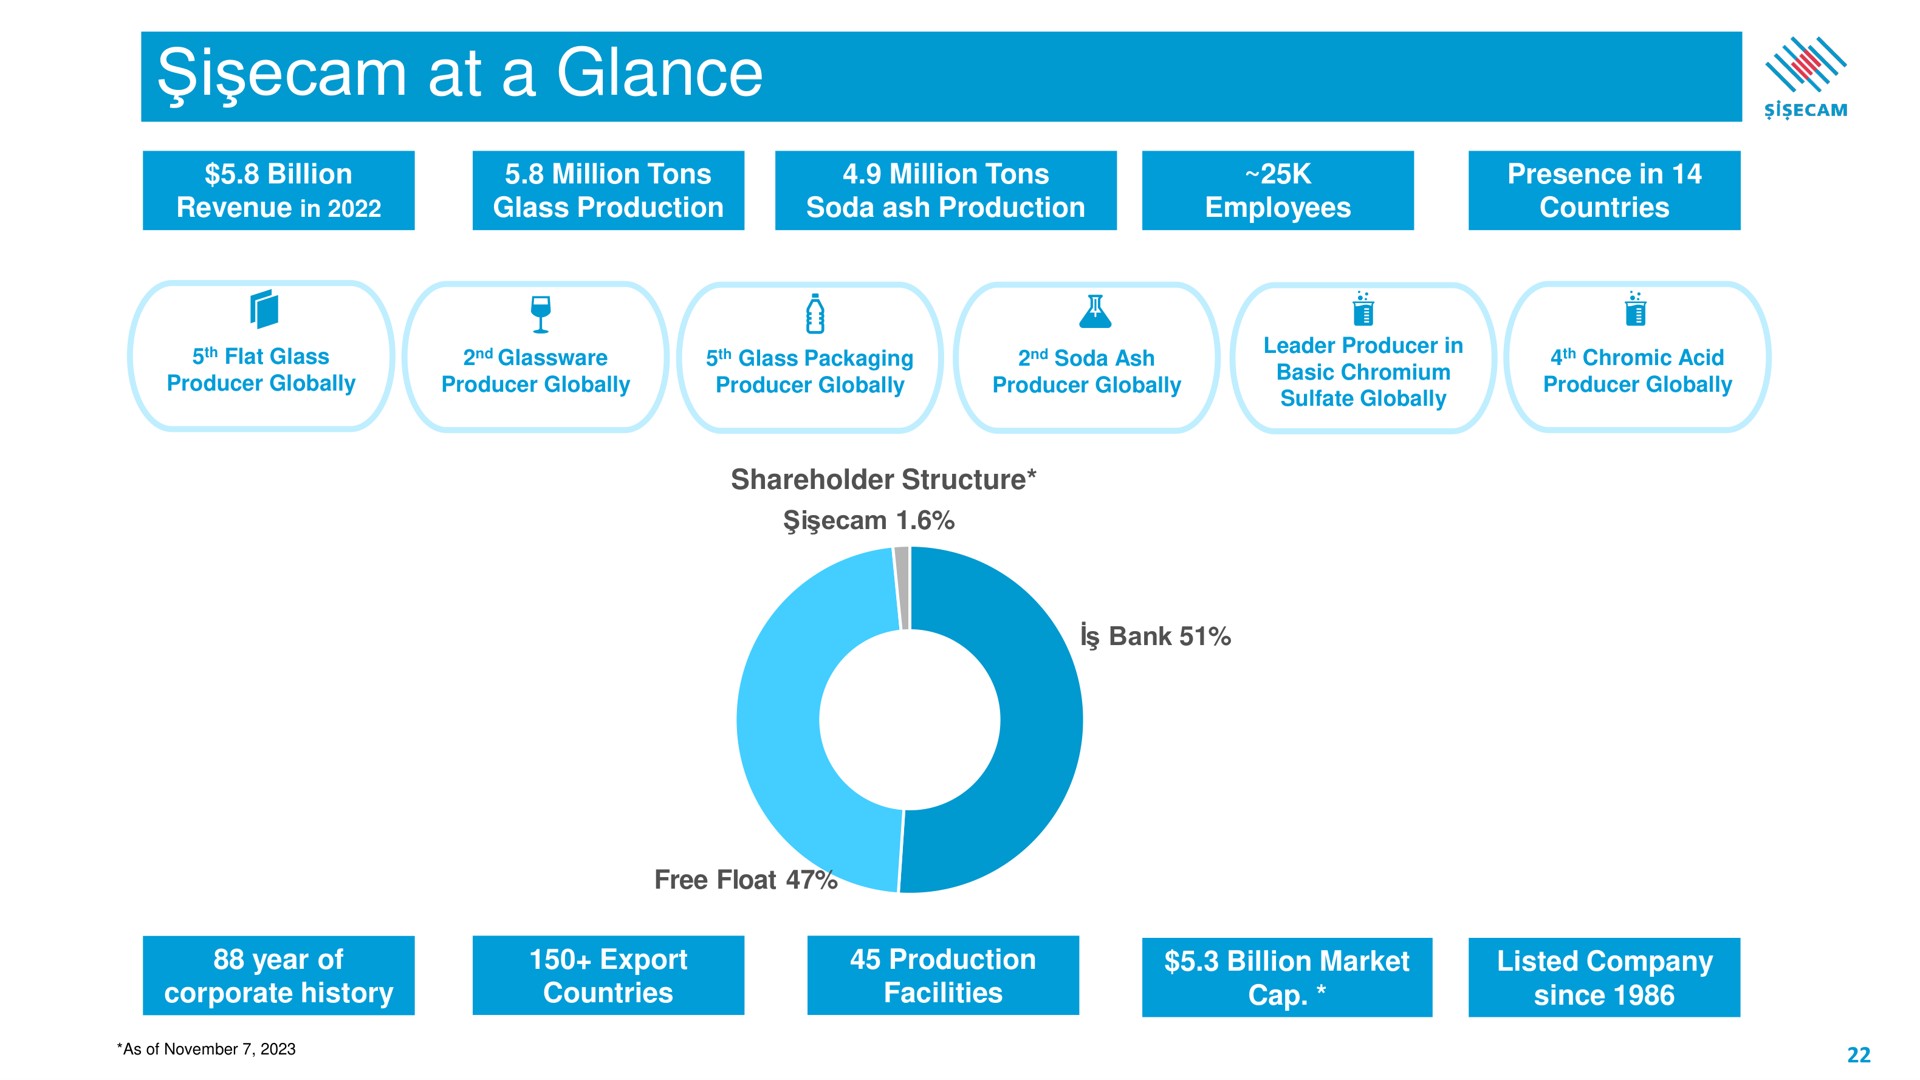 i at a glance | Sisecam Resources